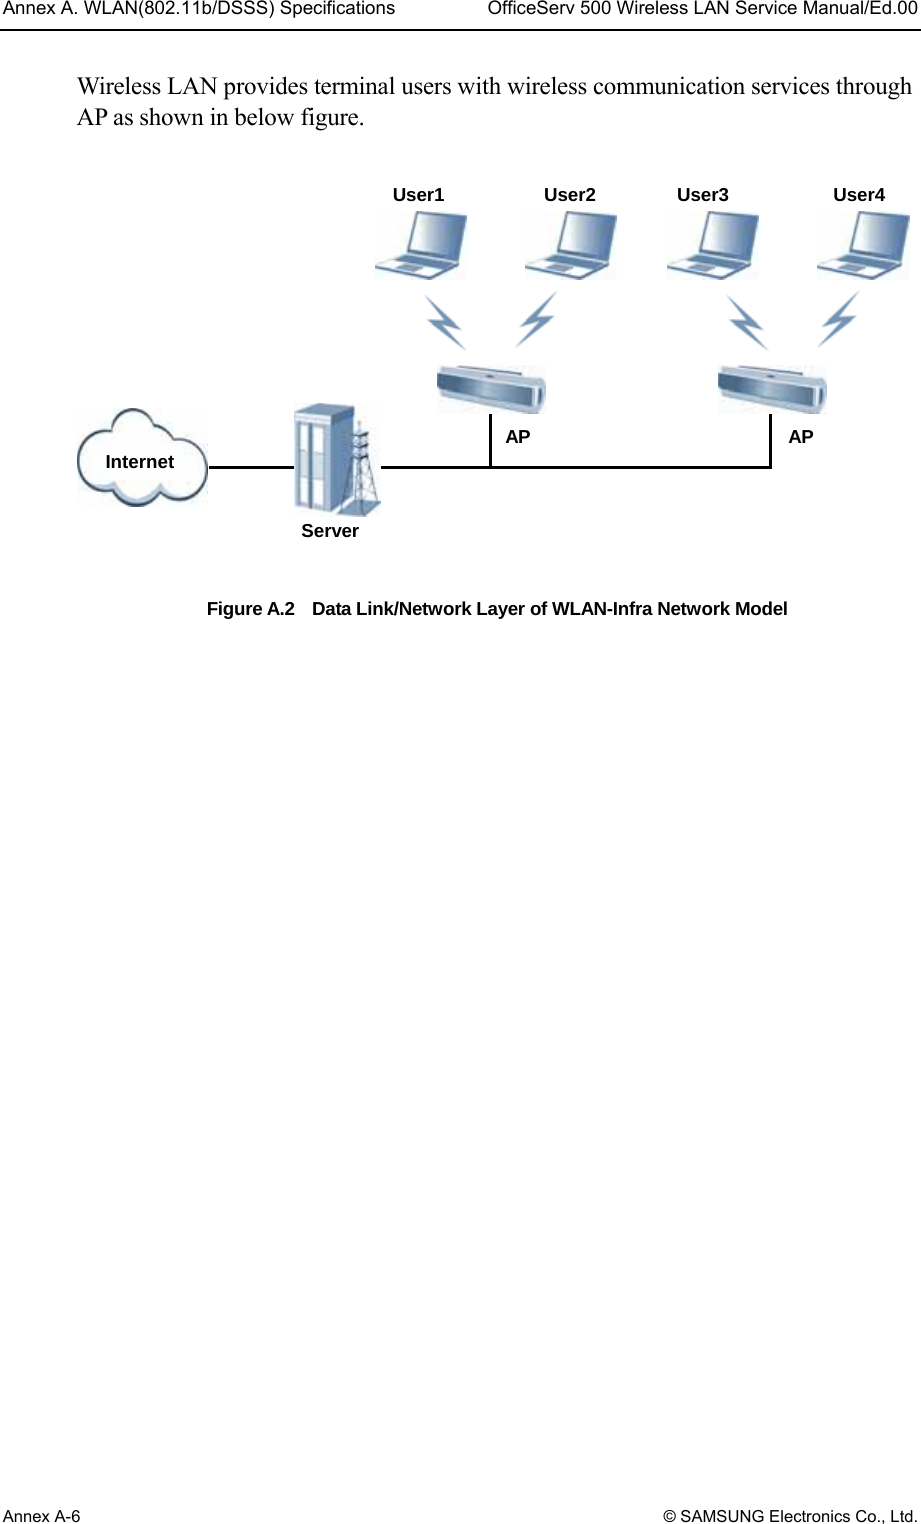 Annex A. WLAN(802.11b/DSSS) Specifications  OfficeServ 500 Wireless LAN Service Manual/Ed.00 Annex A-6 © SAMSUNG Electronics Co., Ltd. Wireless LAN provides terminal users with wireless communication services through AP as shown in below figure.   Figure A.2    Data Link/Network Layer of WLAN-Infra Network Model  User1 User2 User3 User4Server Internet  AP AP 